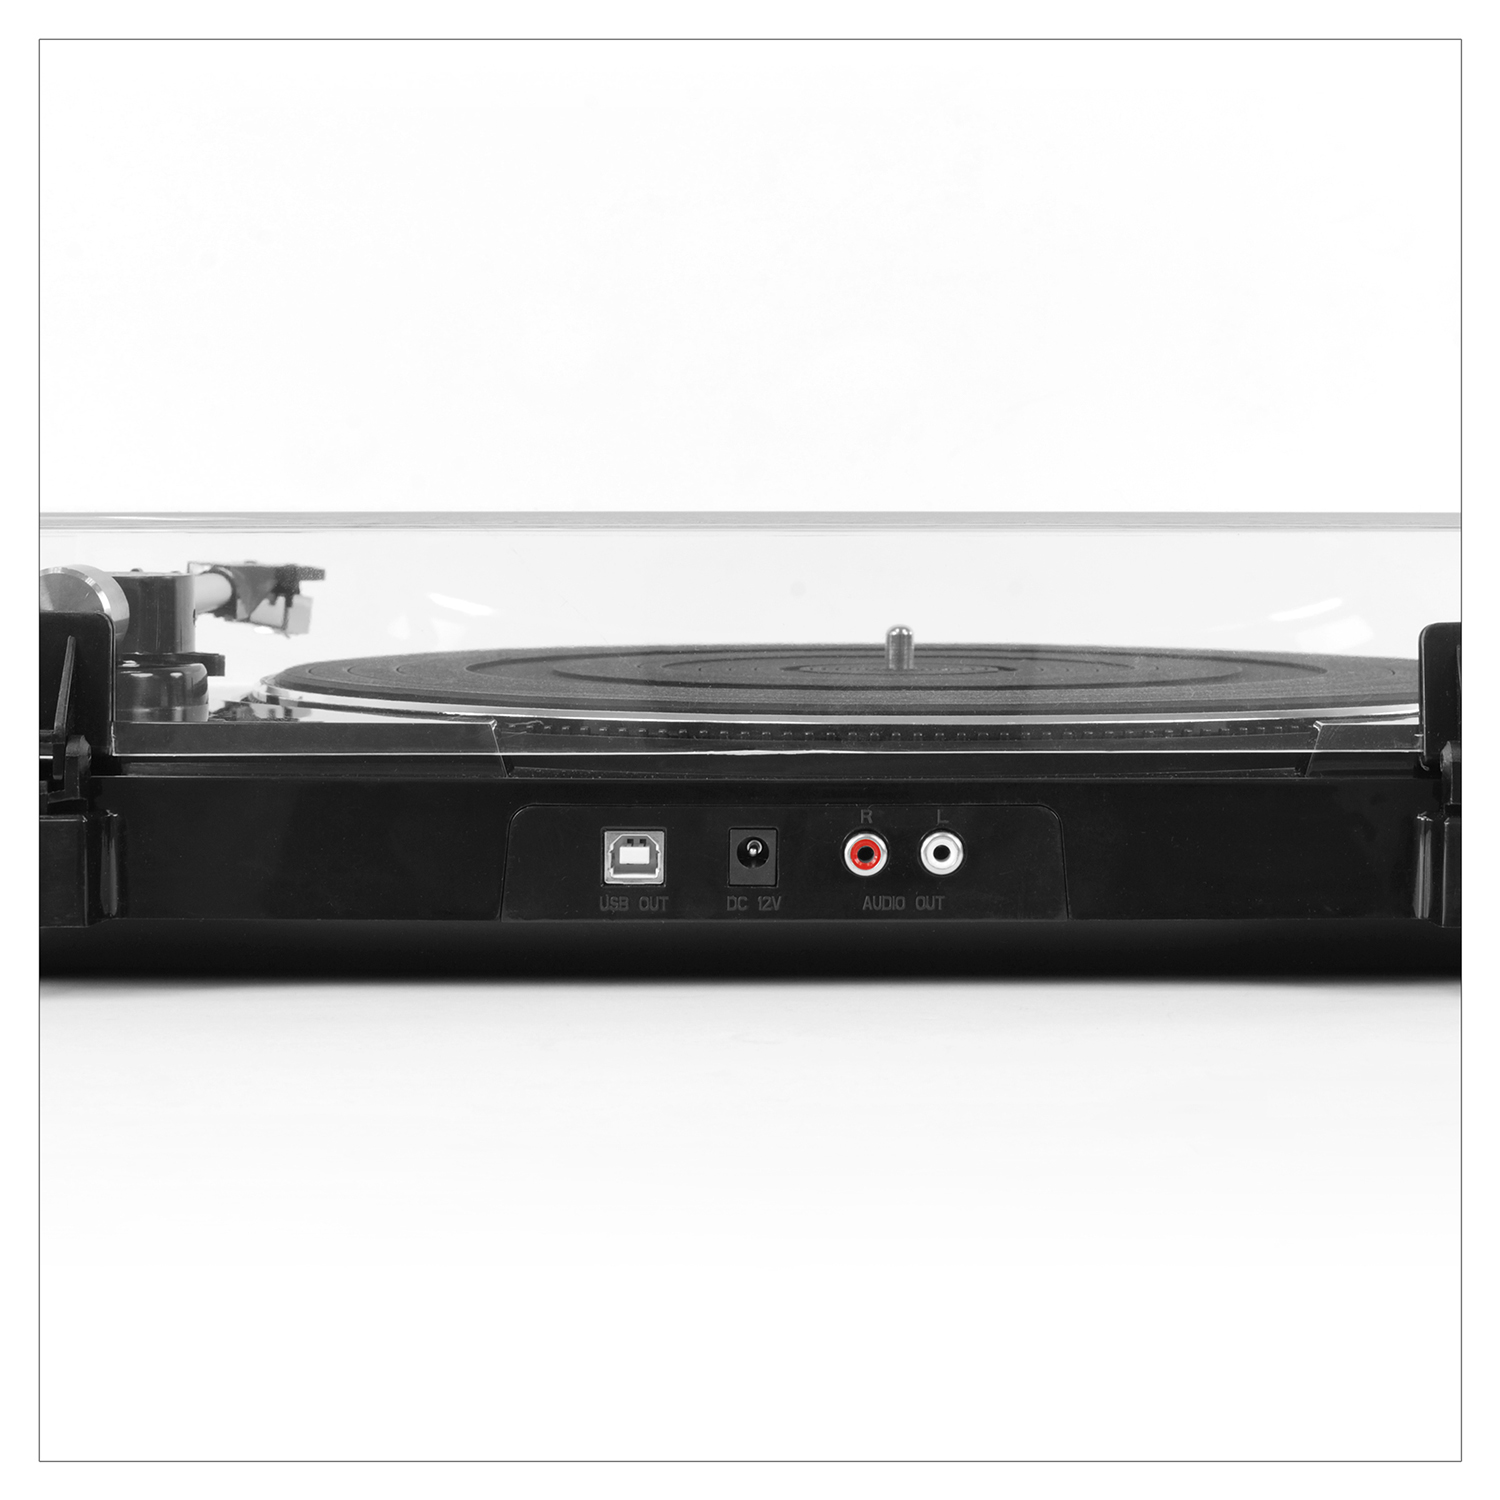 Victrola Pro USB Record Player with 2-Speed Turntable and Dust Cover - Black - image 2 of 3